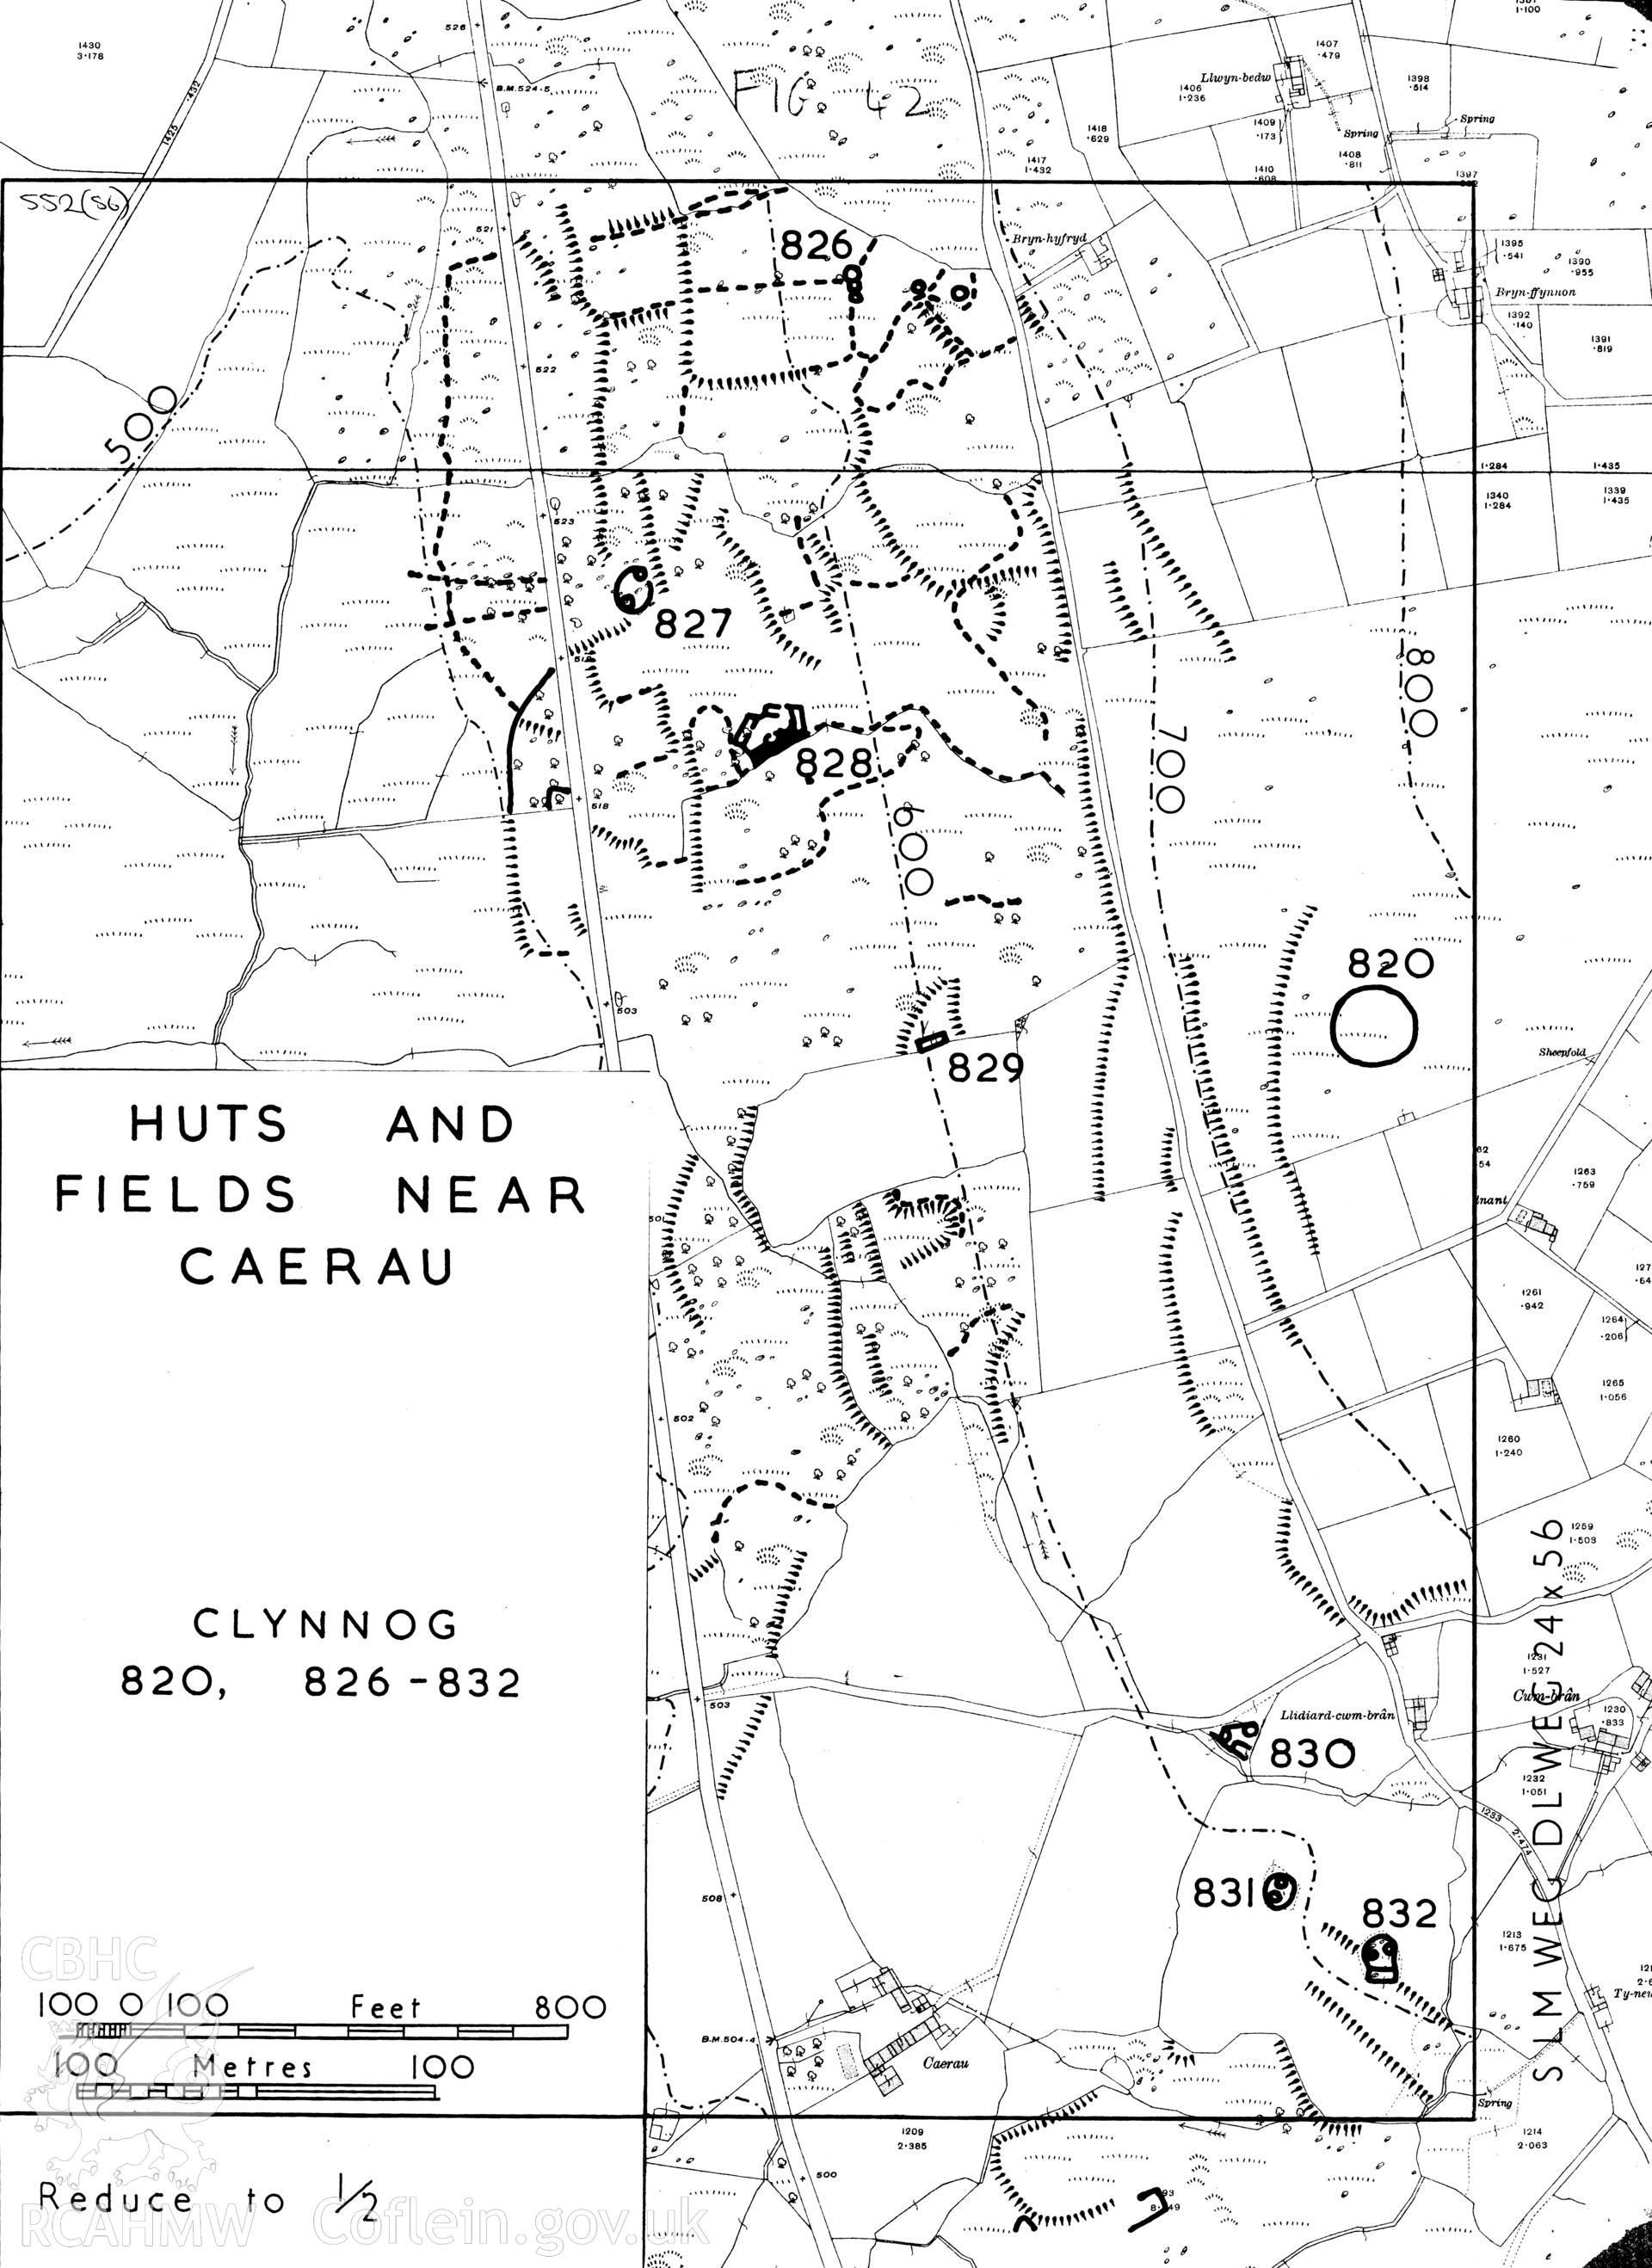 RCAHMW drawing (ink on paper) showing plan of Caerau Hut Groups, Clynnog.  Published in Caerns Inventory Vol II, fig 42.